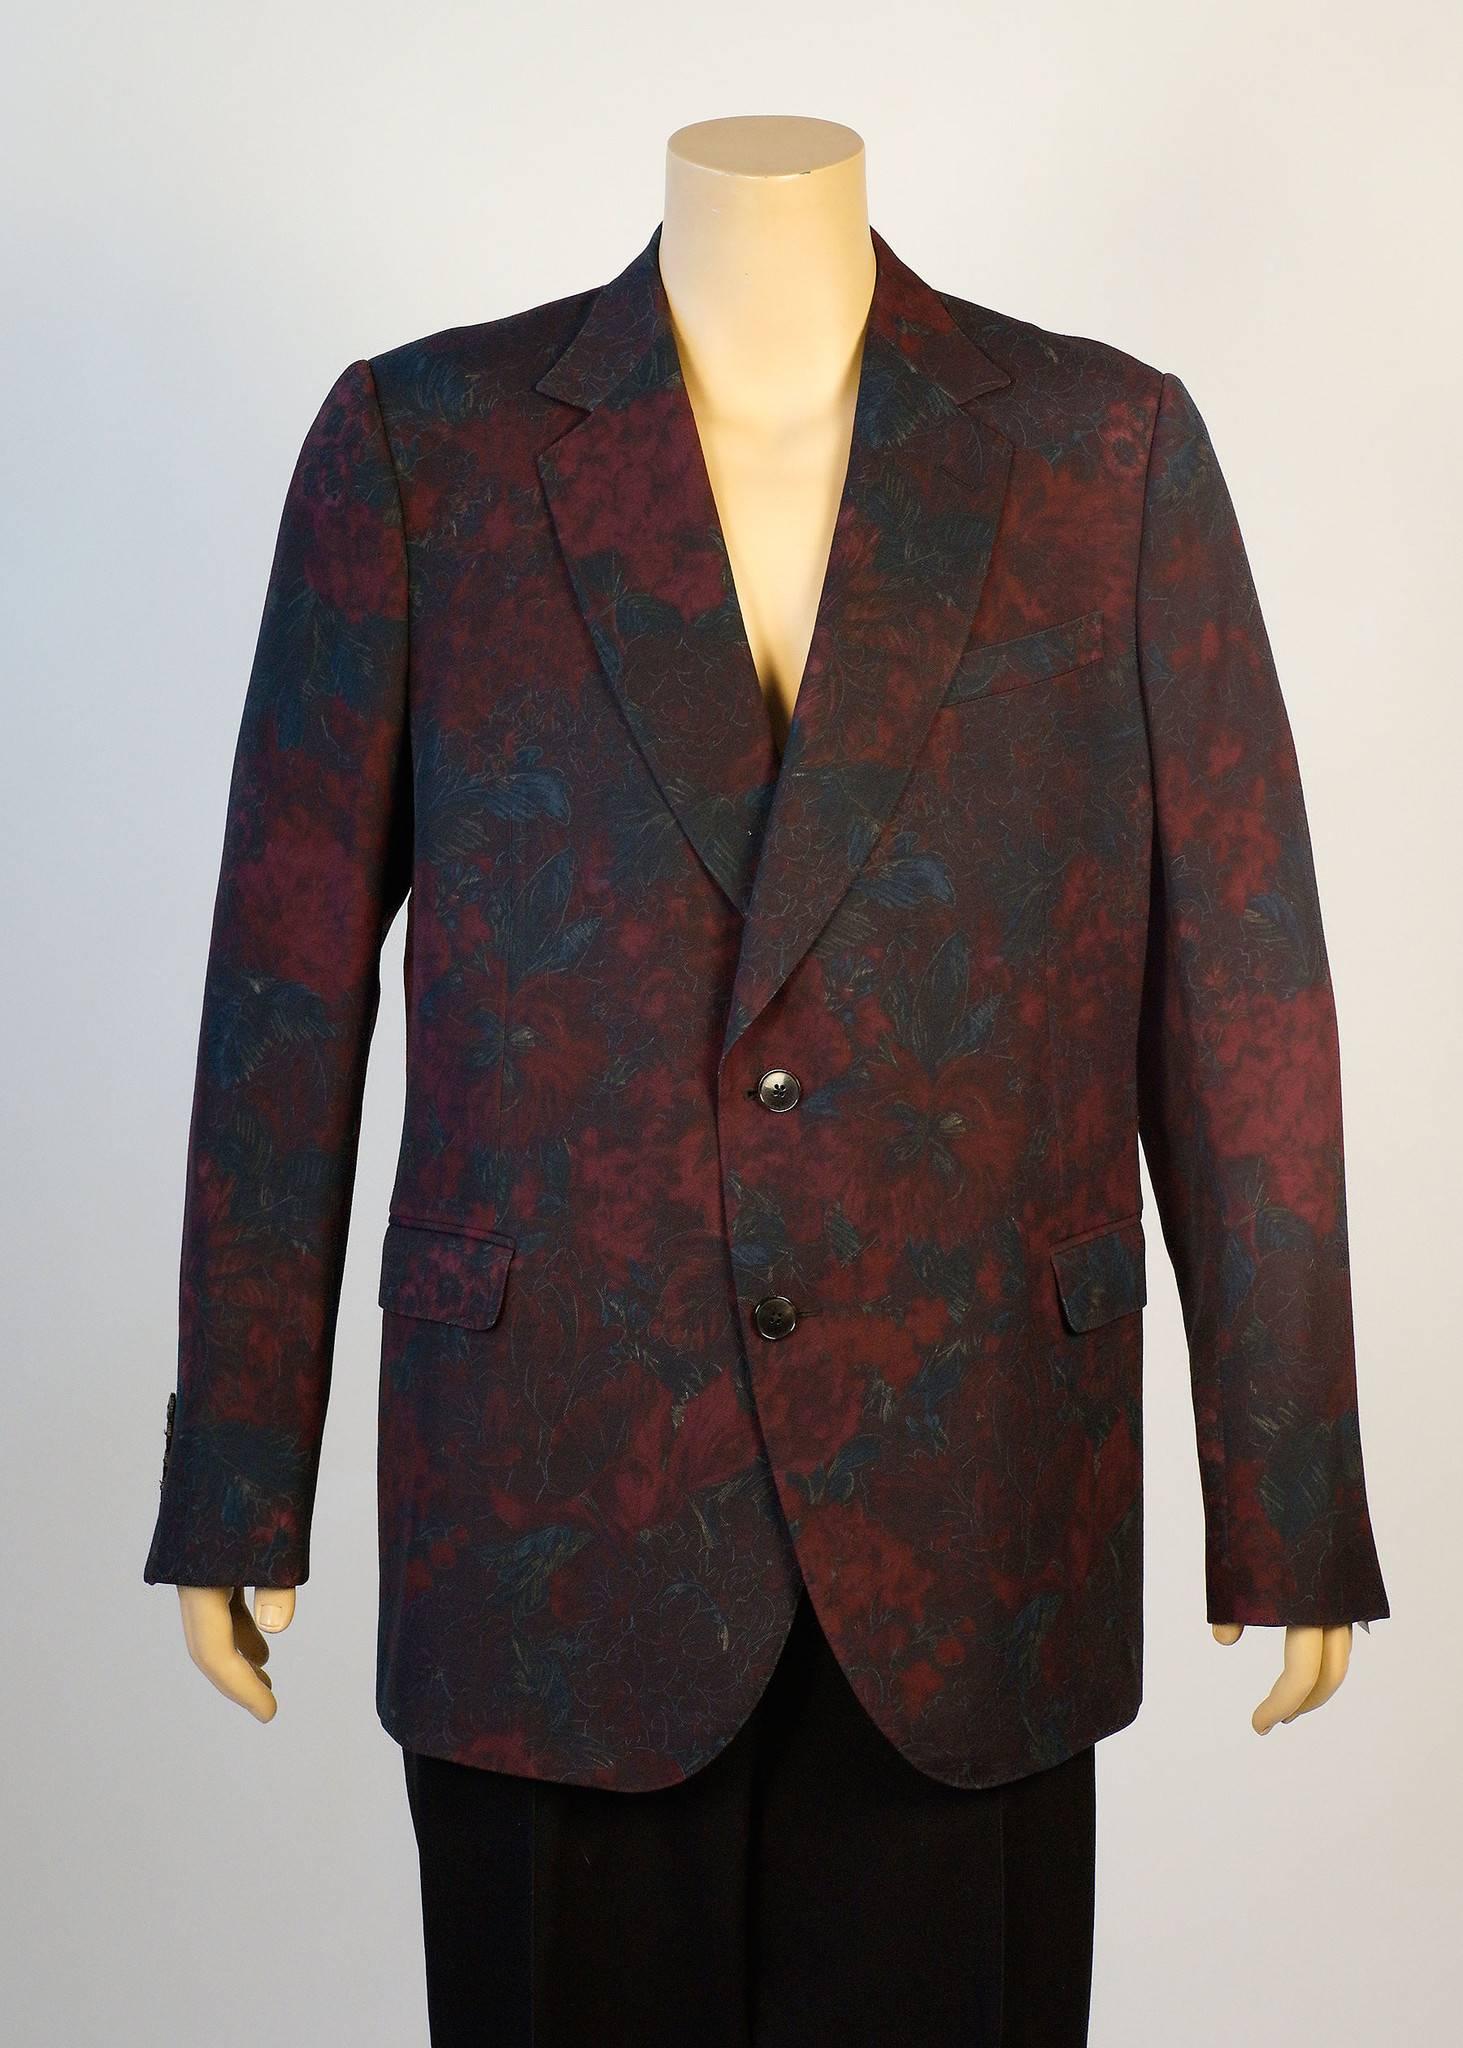 Vintage Gucci Tom Ford floral jacket with 2 front pockets and pocket square. 

Made In Italy, 100% wool in Burgundy and Blue muted floral on Brown background.

-Measurements-
Sleeve length:27